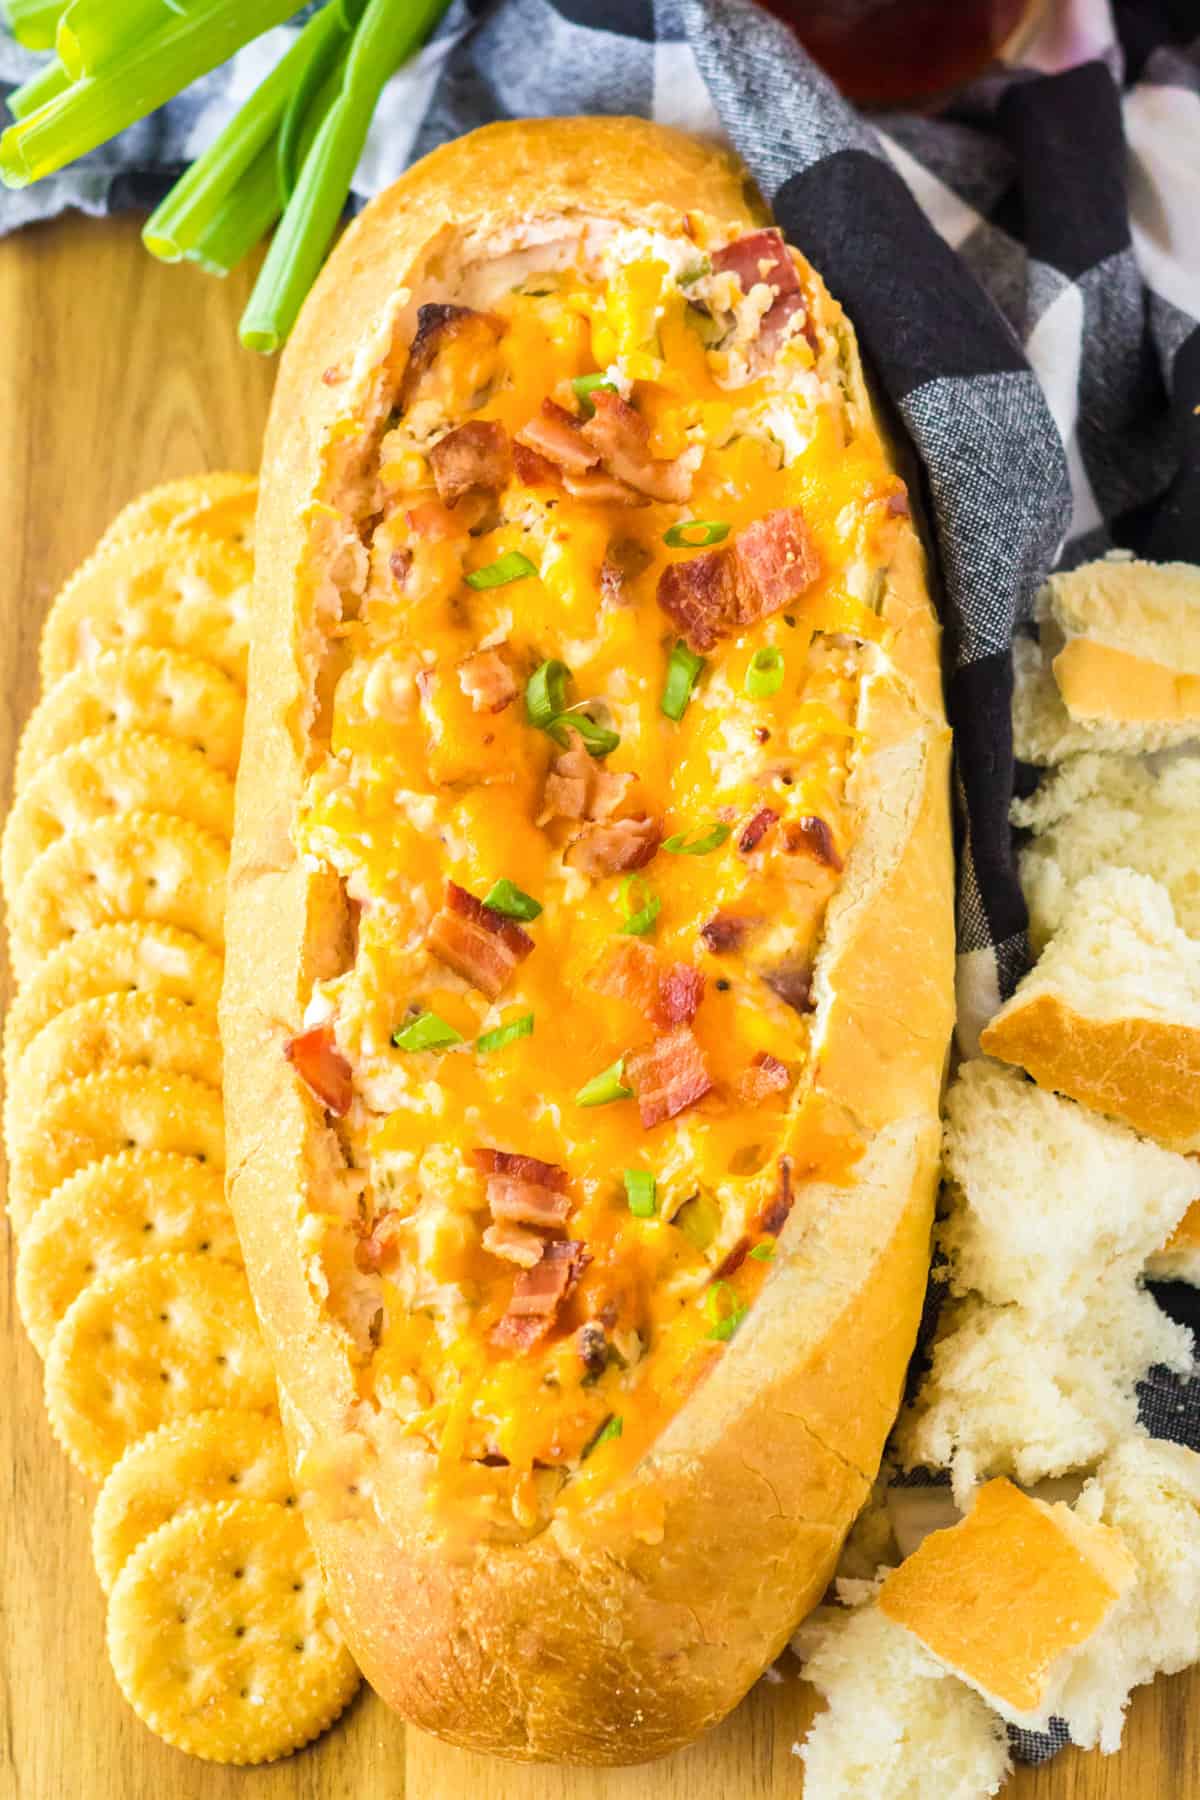 Mississippi Sin Dip with bacon, cheese, and scallions in a bread bowl, served with crackers and bread pieces for dipping.